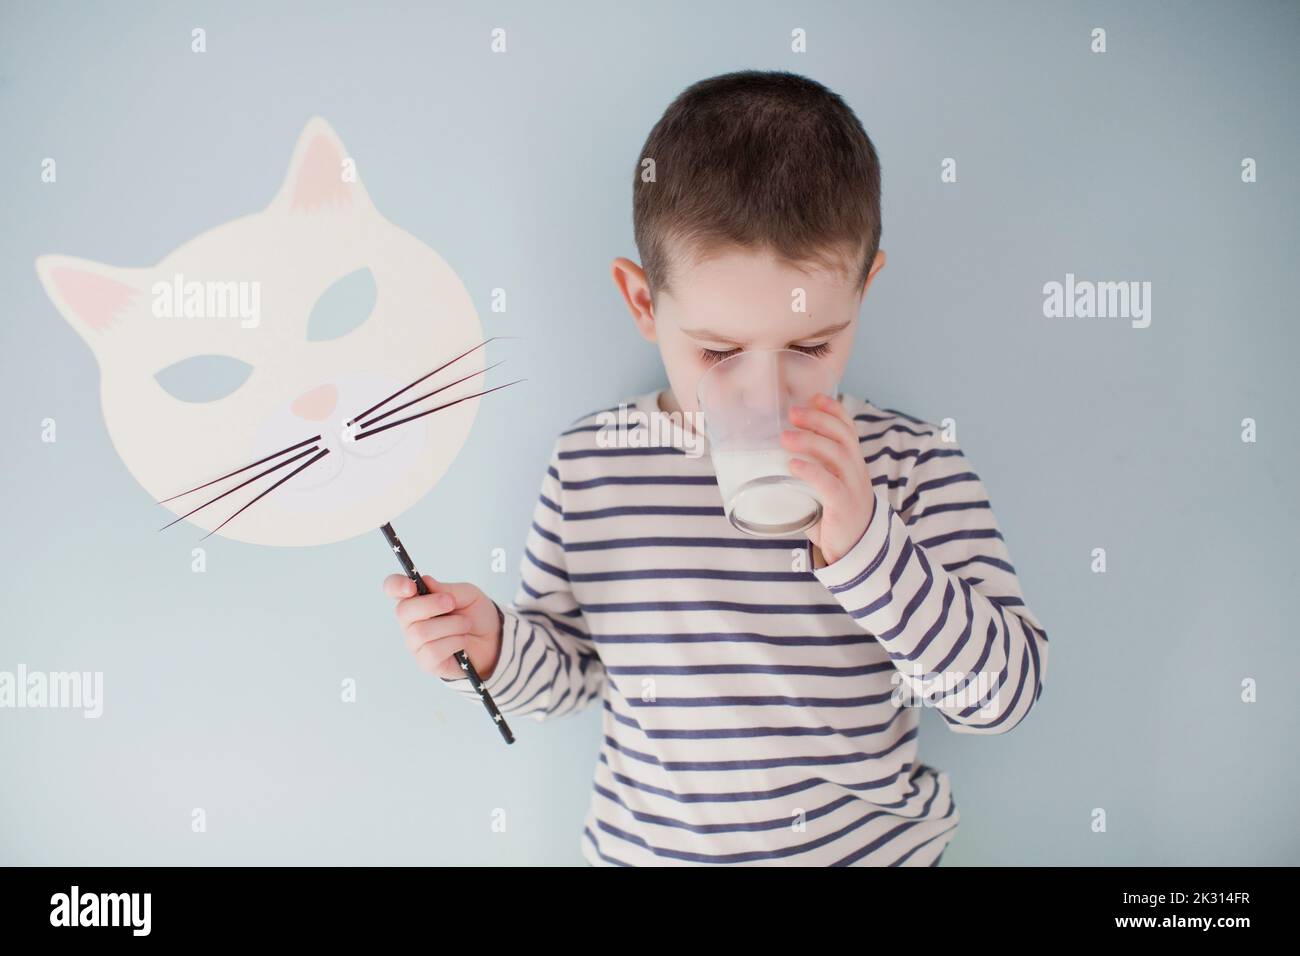 Boy with Halloween mask drinking milk in front of gray wall Stock Photo